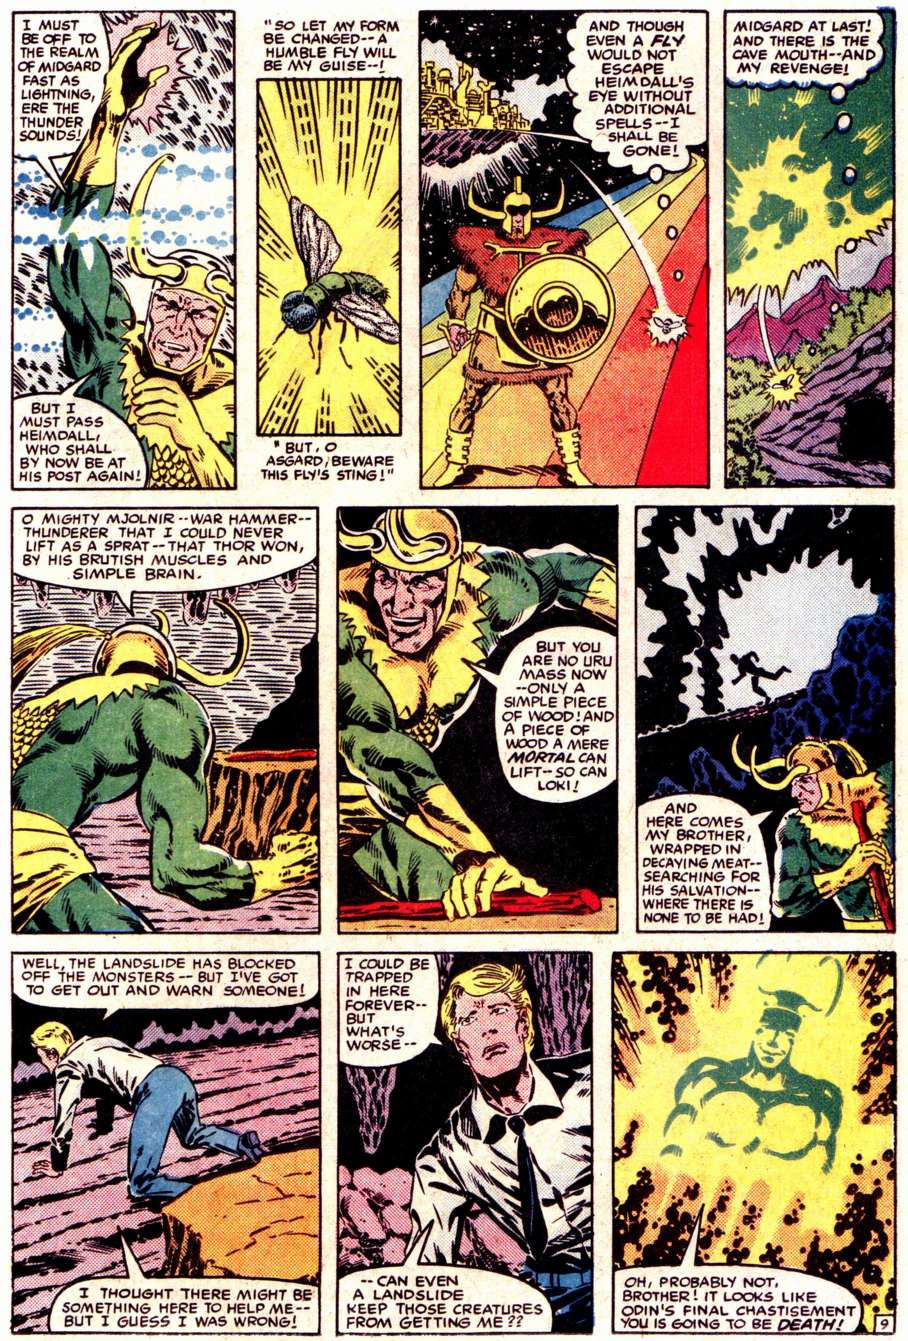 What If? (1977) issue 47 - Loki had found The hammer of Thor - Page 10